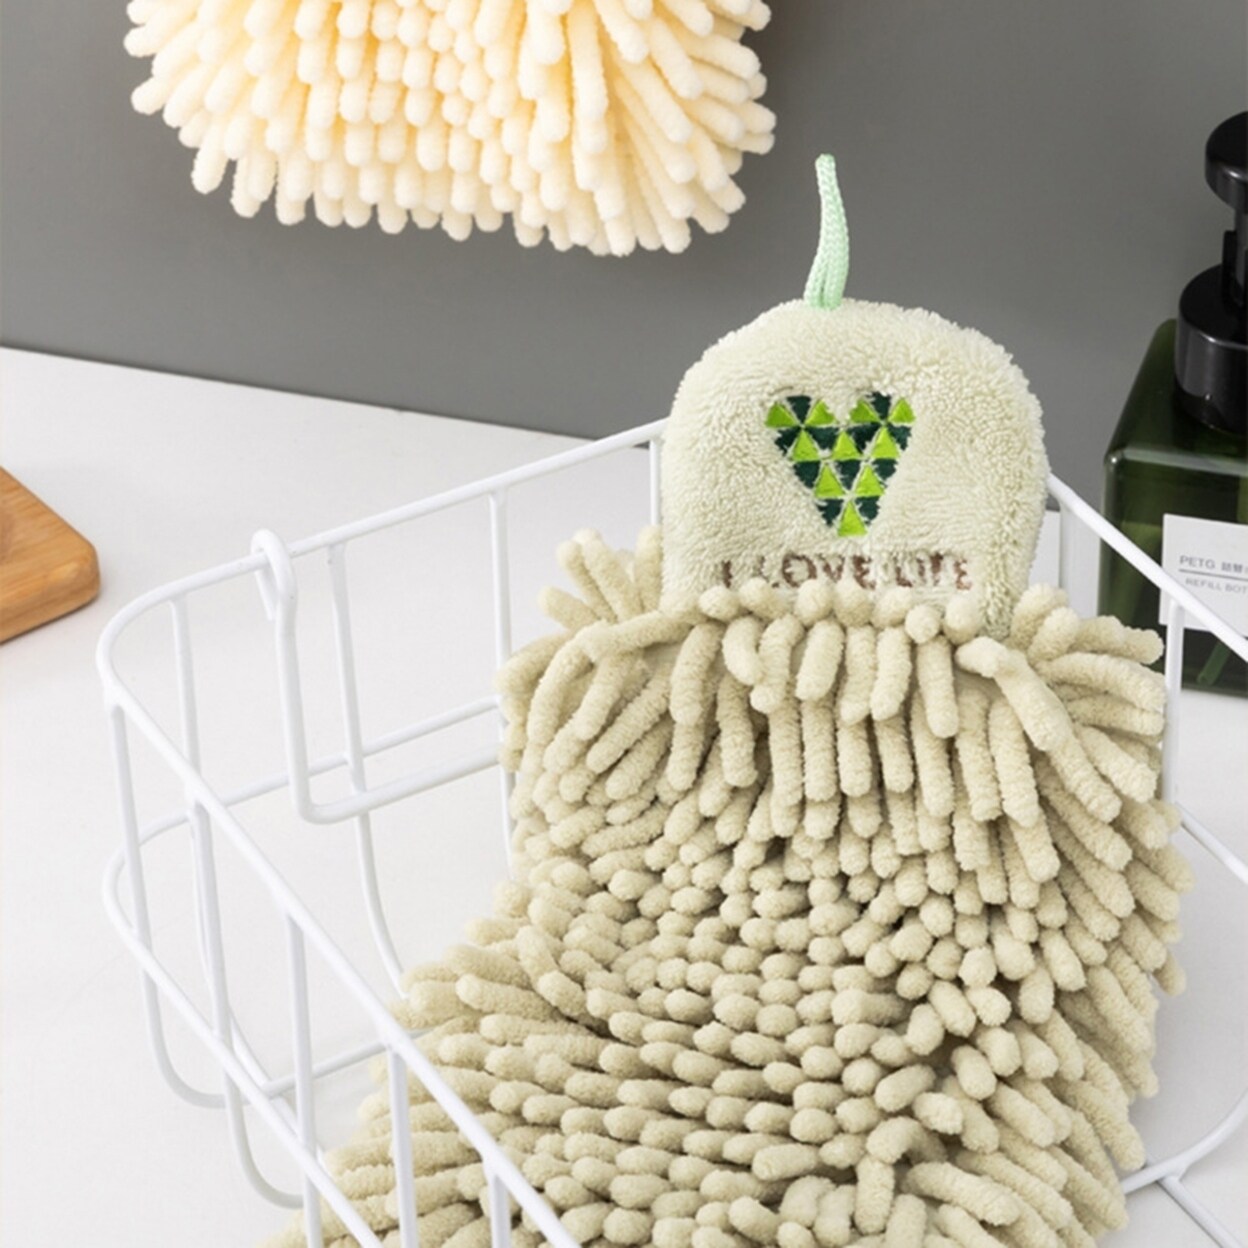 https://ak1.ostkcdn.com/images/products/is/images/direct/fdb970e3142166774e59a97473124b54feb11c28/QuickDrying-Hanging-Hand-Towel-Soft-Chenille-Stylish-Washcloth-Hanging-Towel-For-Household.jpg